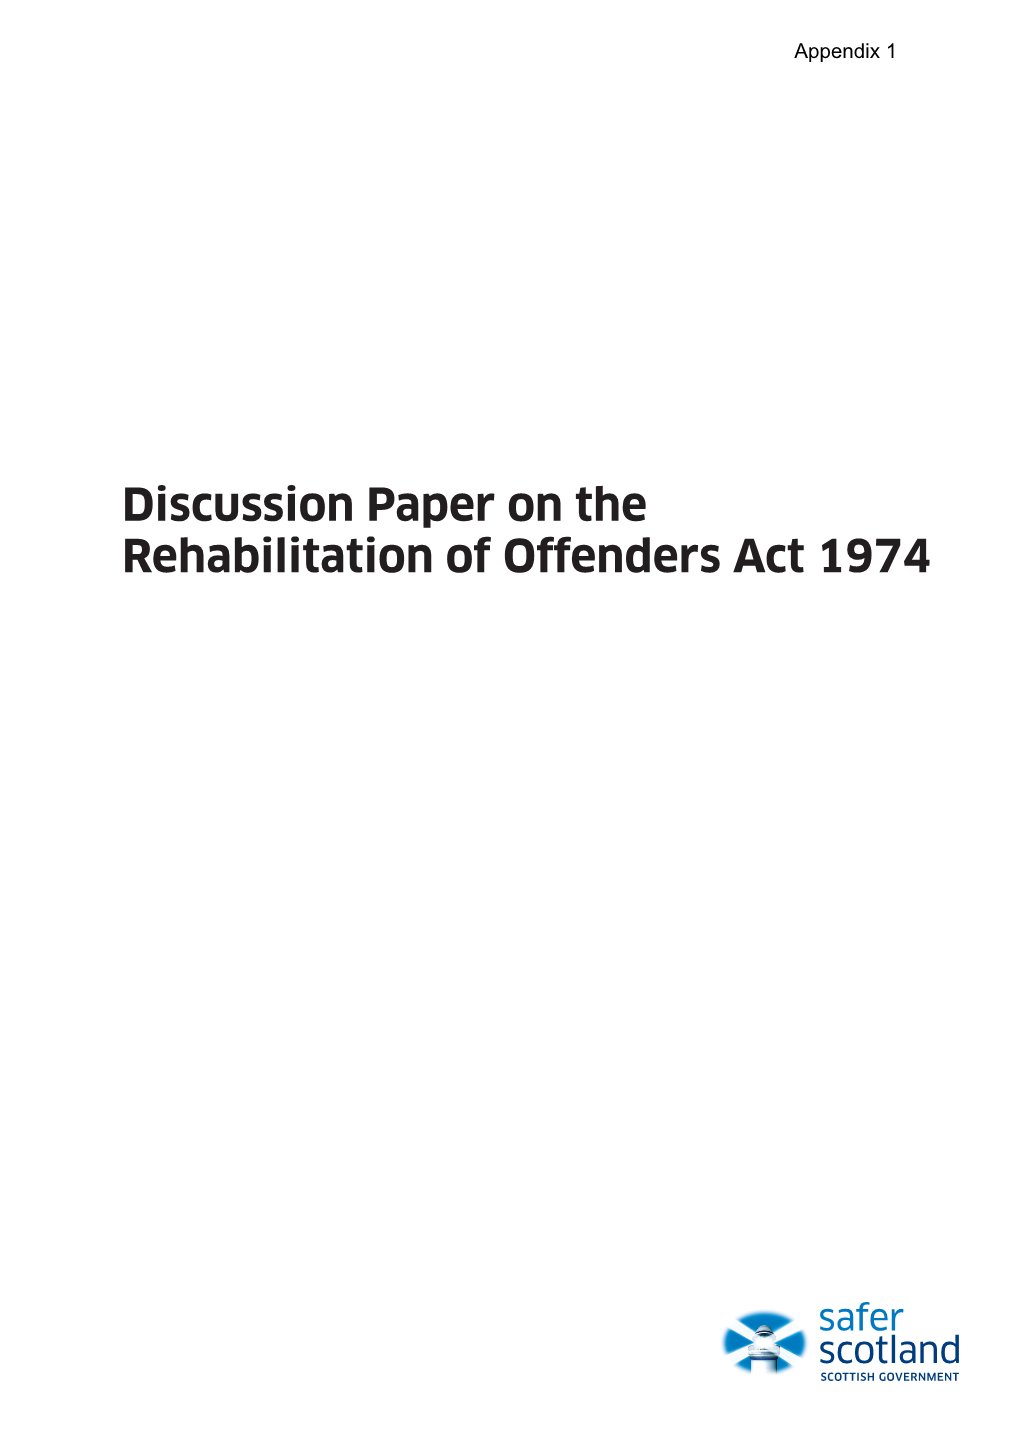 Discussion Paper on the Rehabilitation of Offenders Act 1974